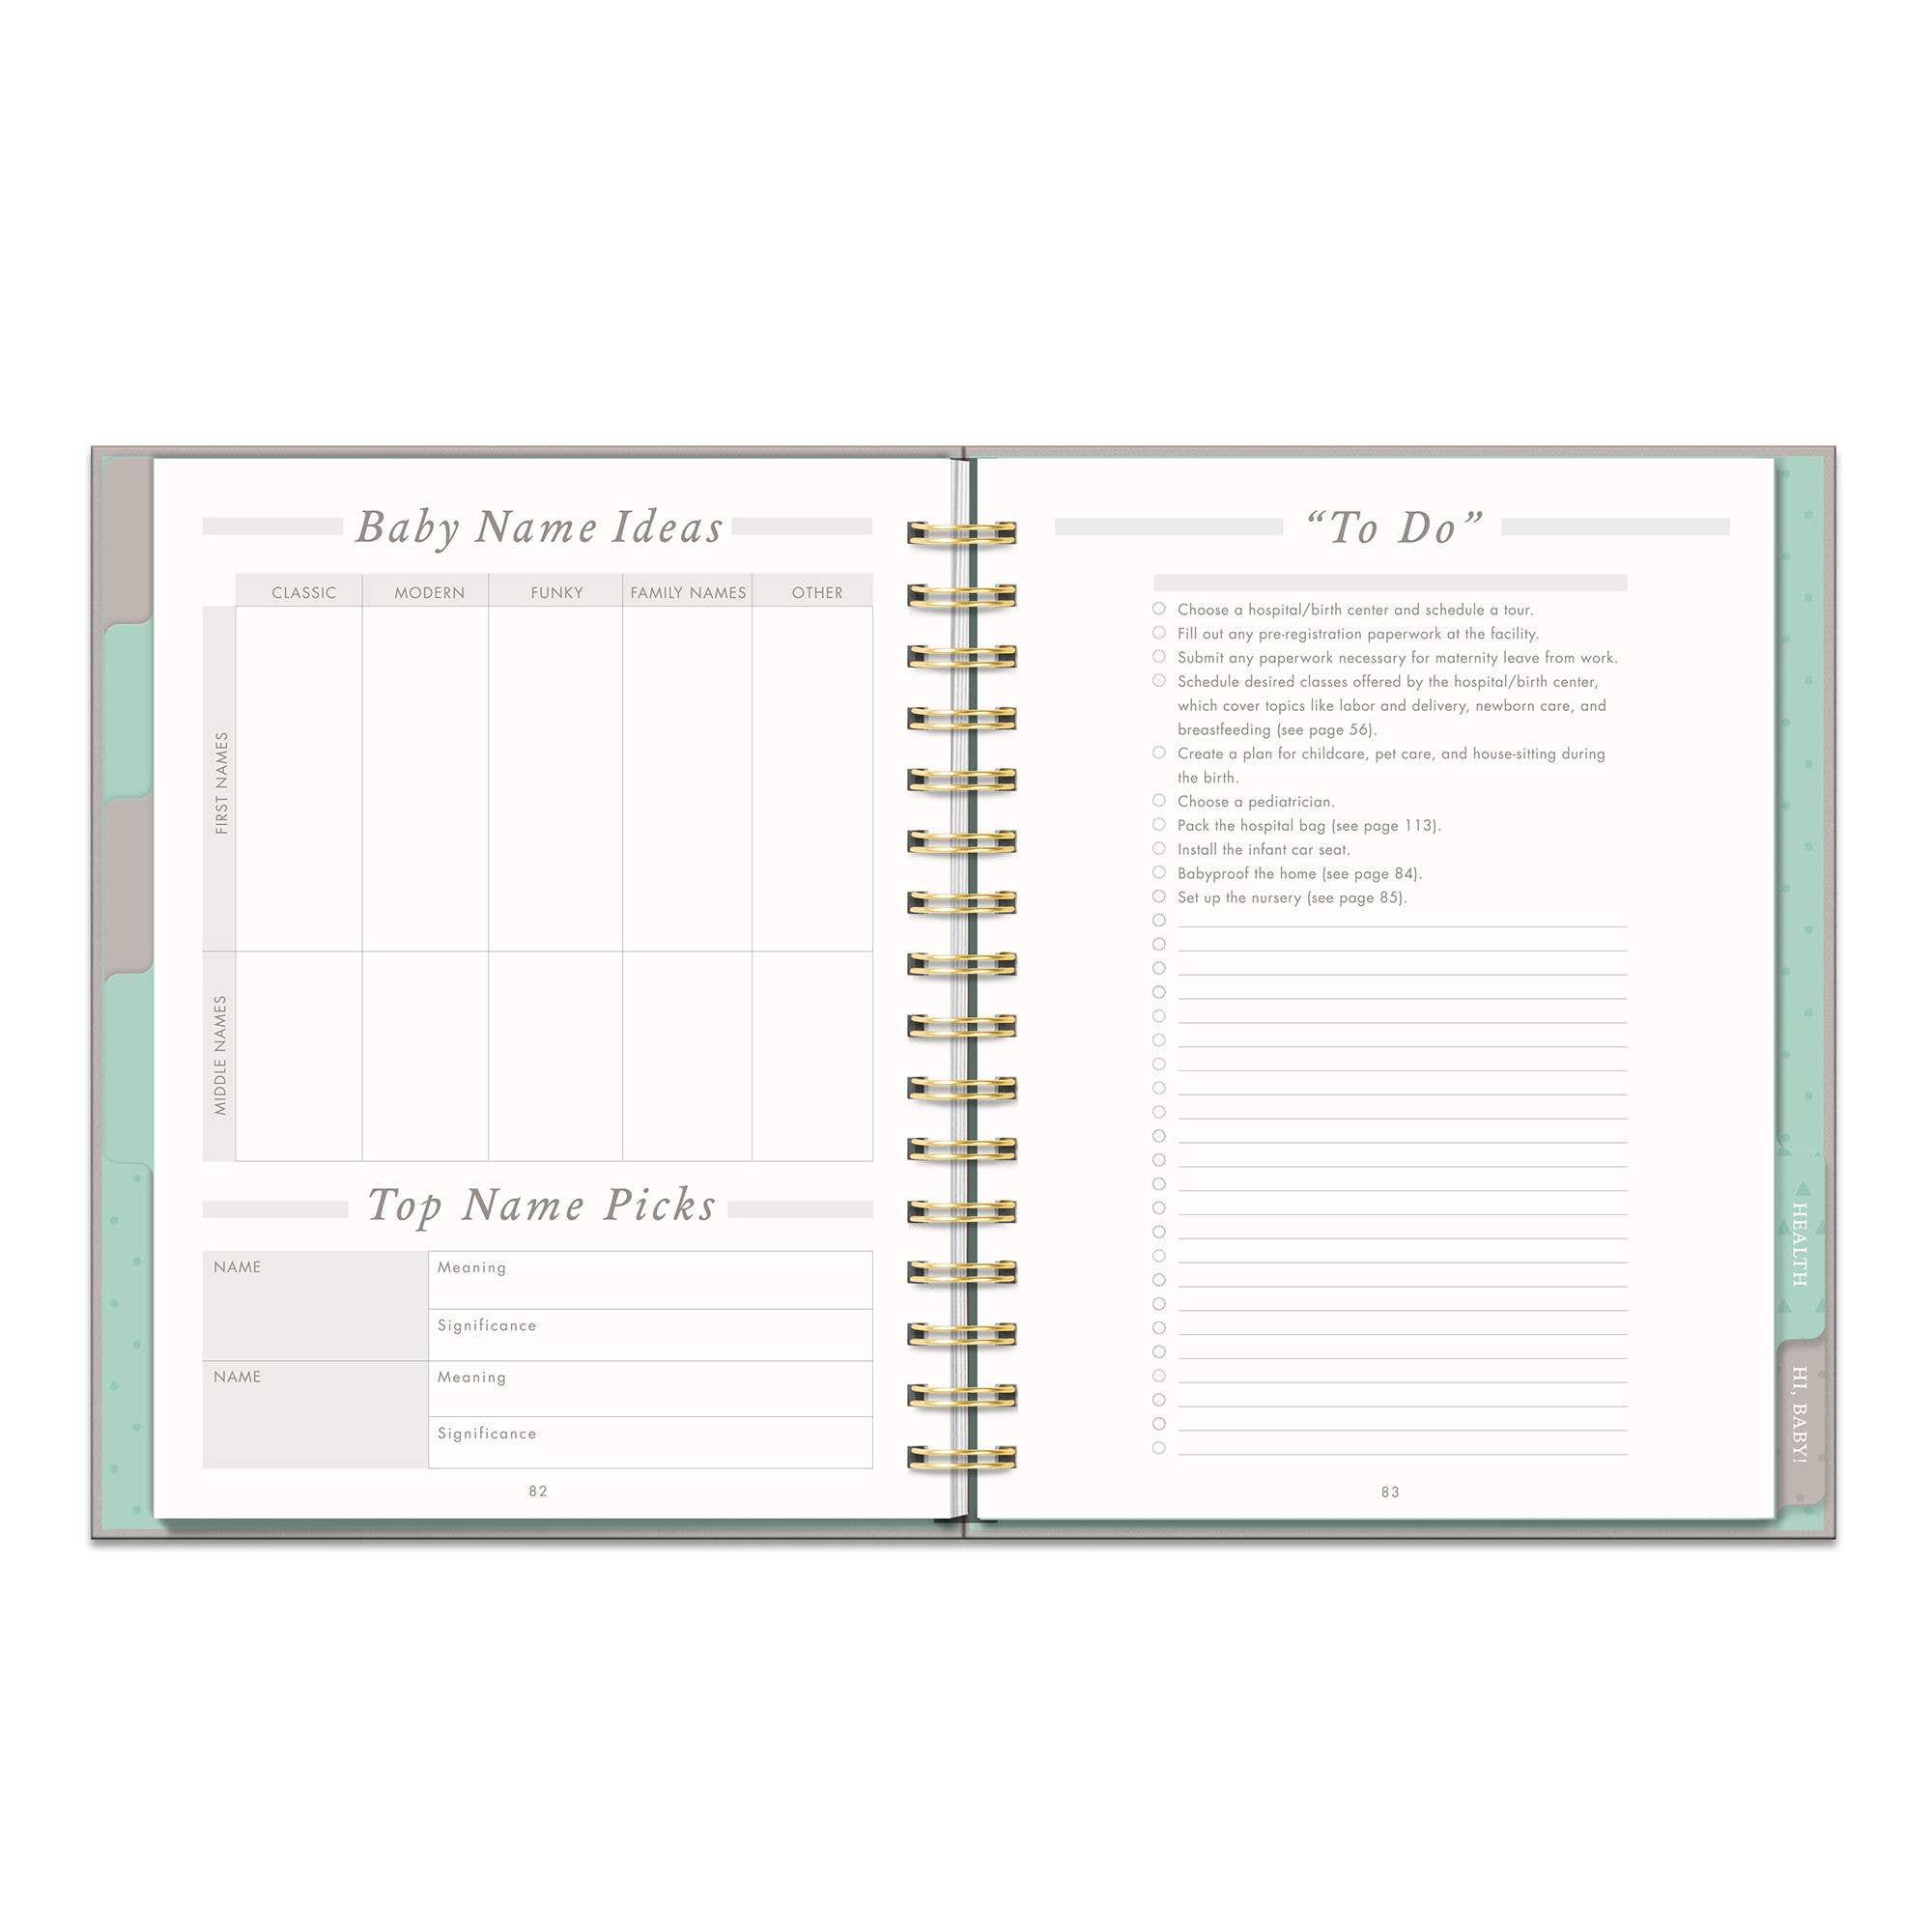 Studio Oh! - Countdown to Baby Undated Pregnancy Planner